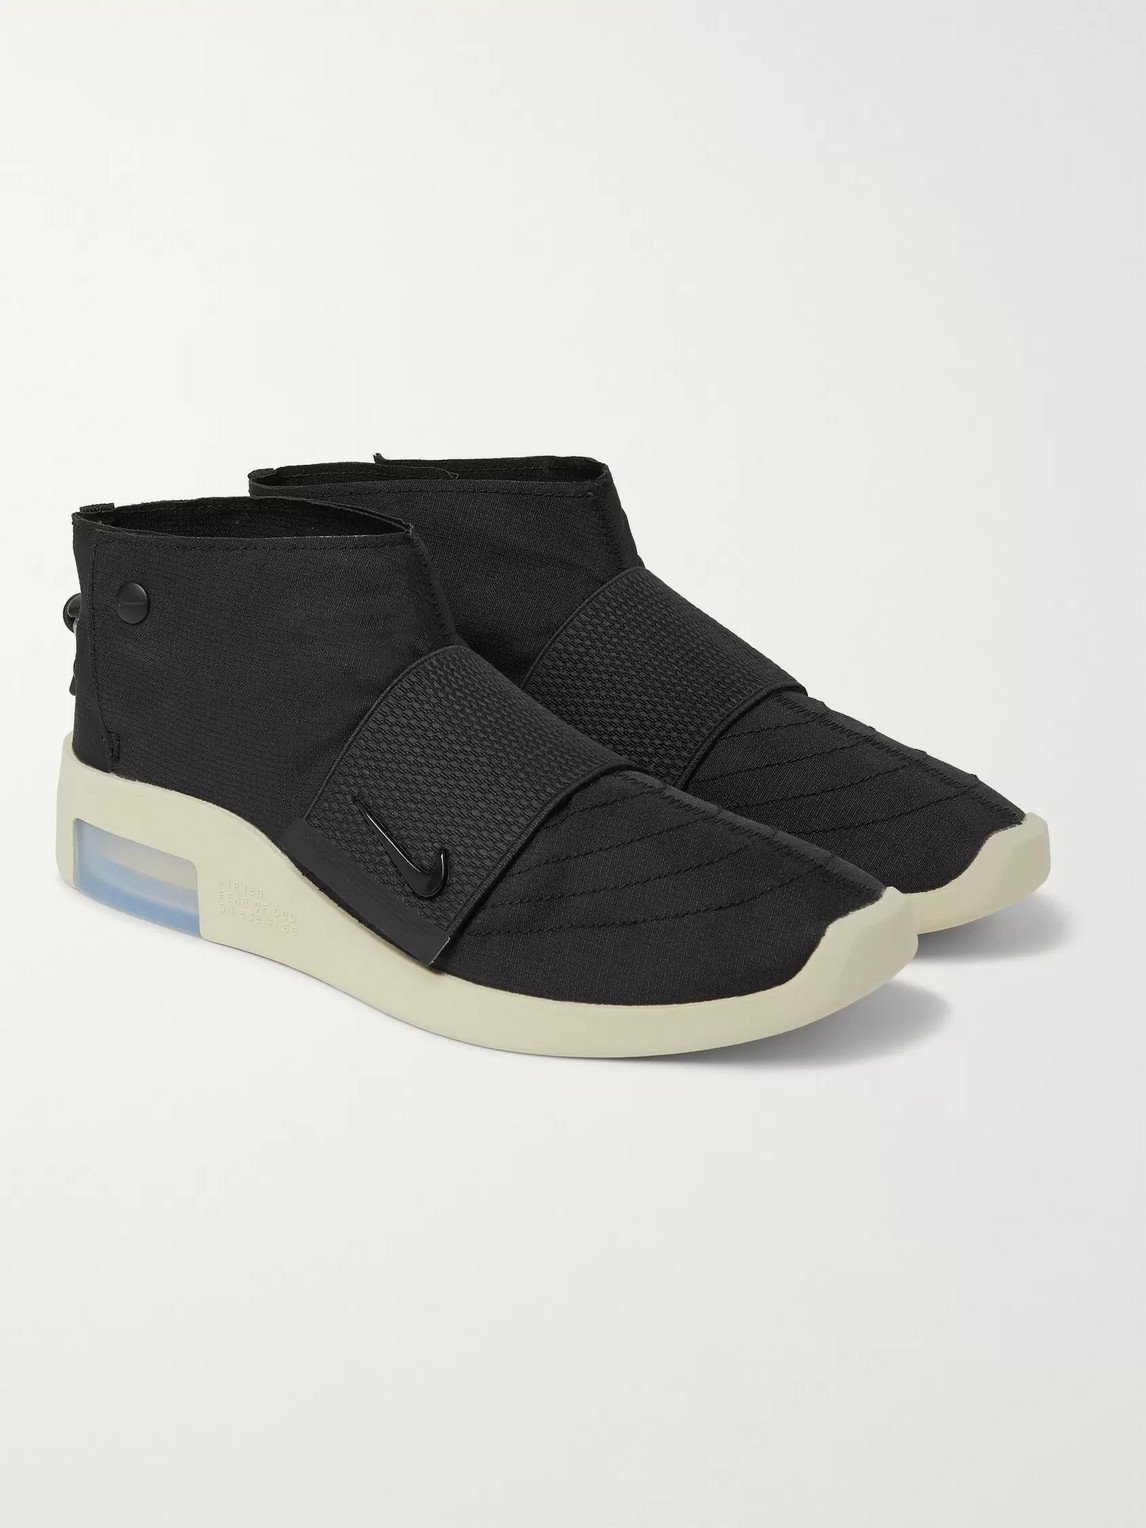 NIKE FEAR OF GOD AIR 1 MOCCASIN RIPSTOP SNEAKERS